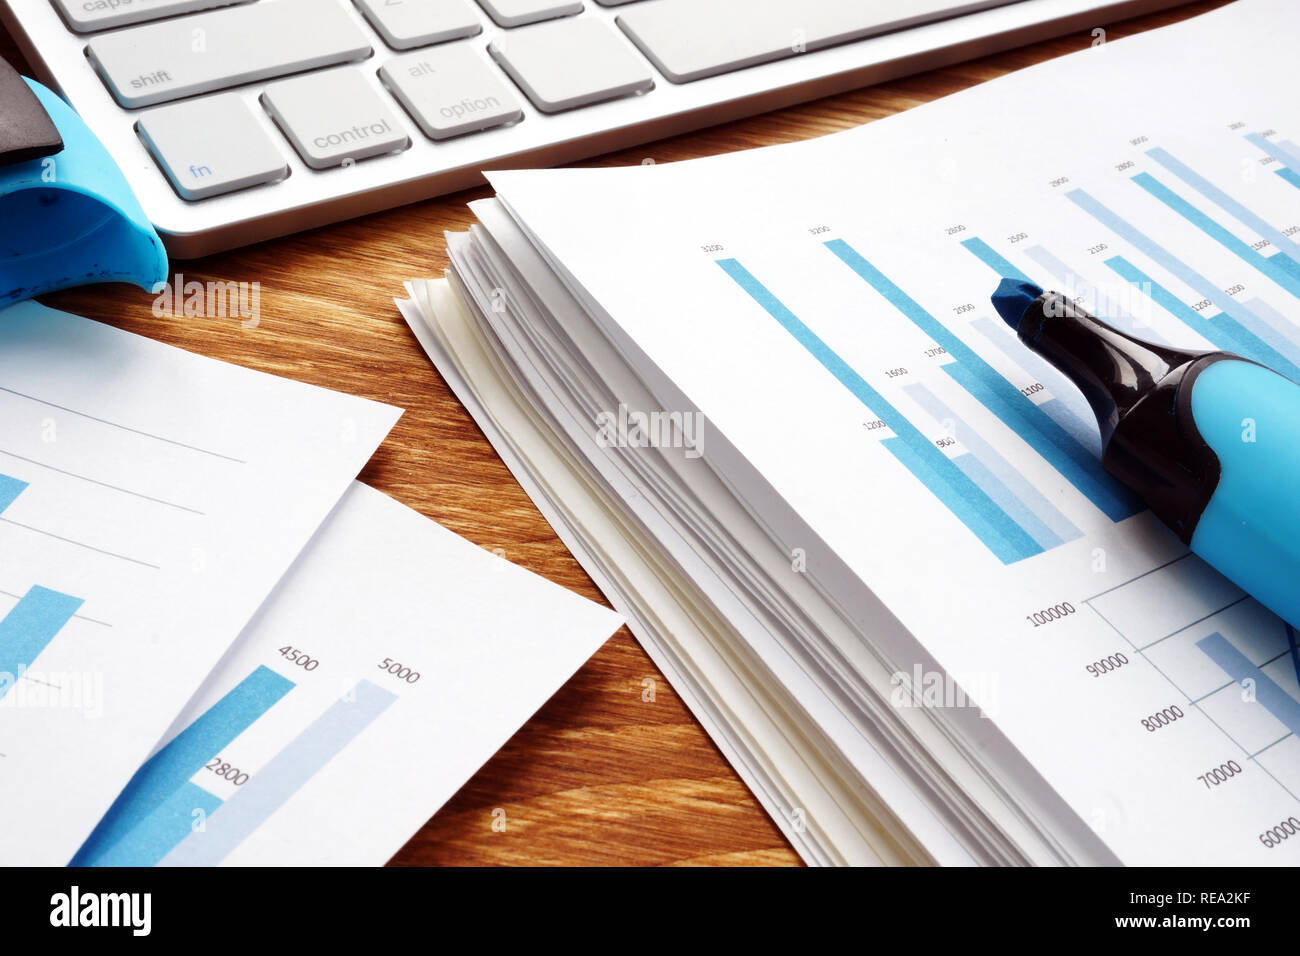 Pile of business documents on desk. Financial papers in the office. Stock Photo